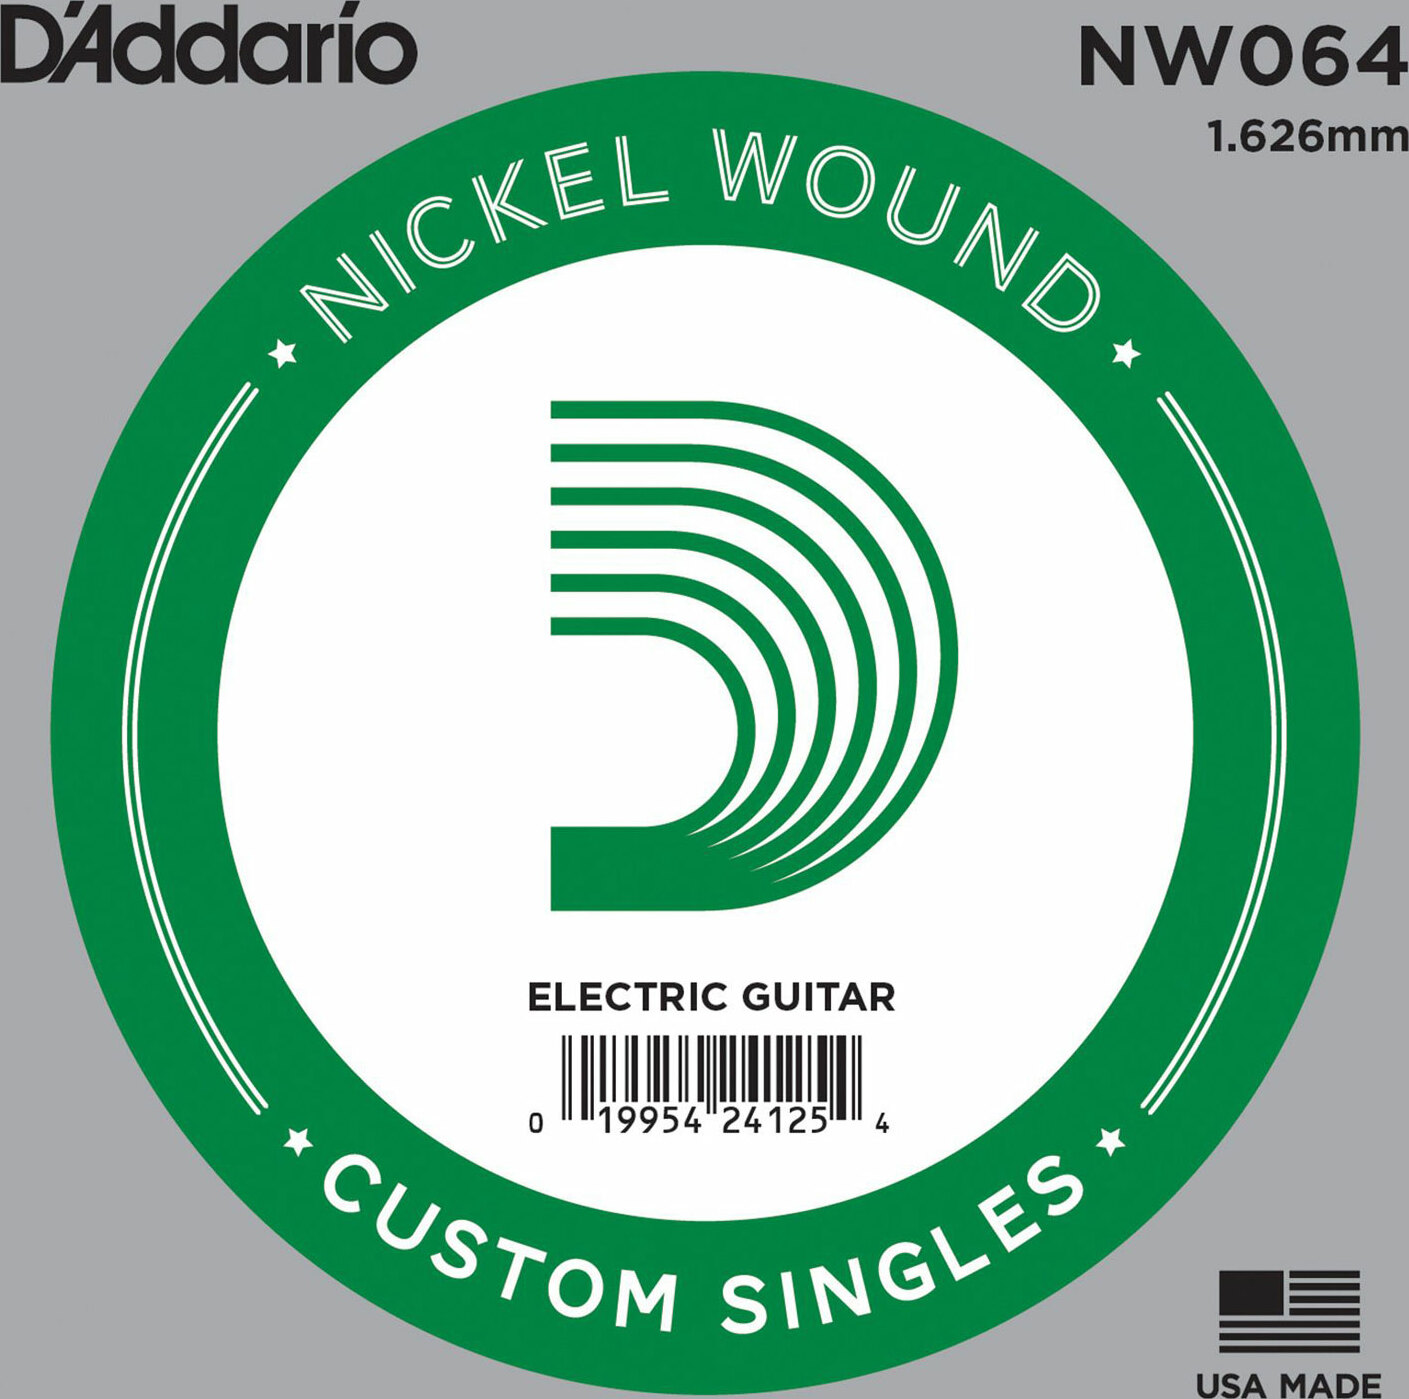 D'addario Corde Au DÉtail Electric (1) Nw064  Single Xl Nickel Wound 064 - Westerngitaarsnaren - Main picture